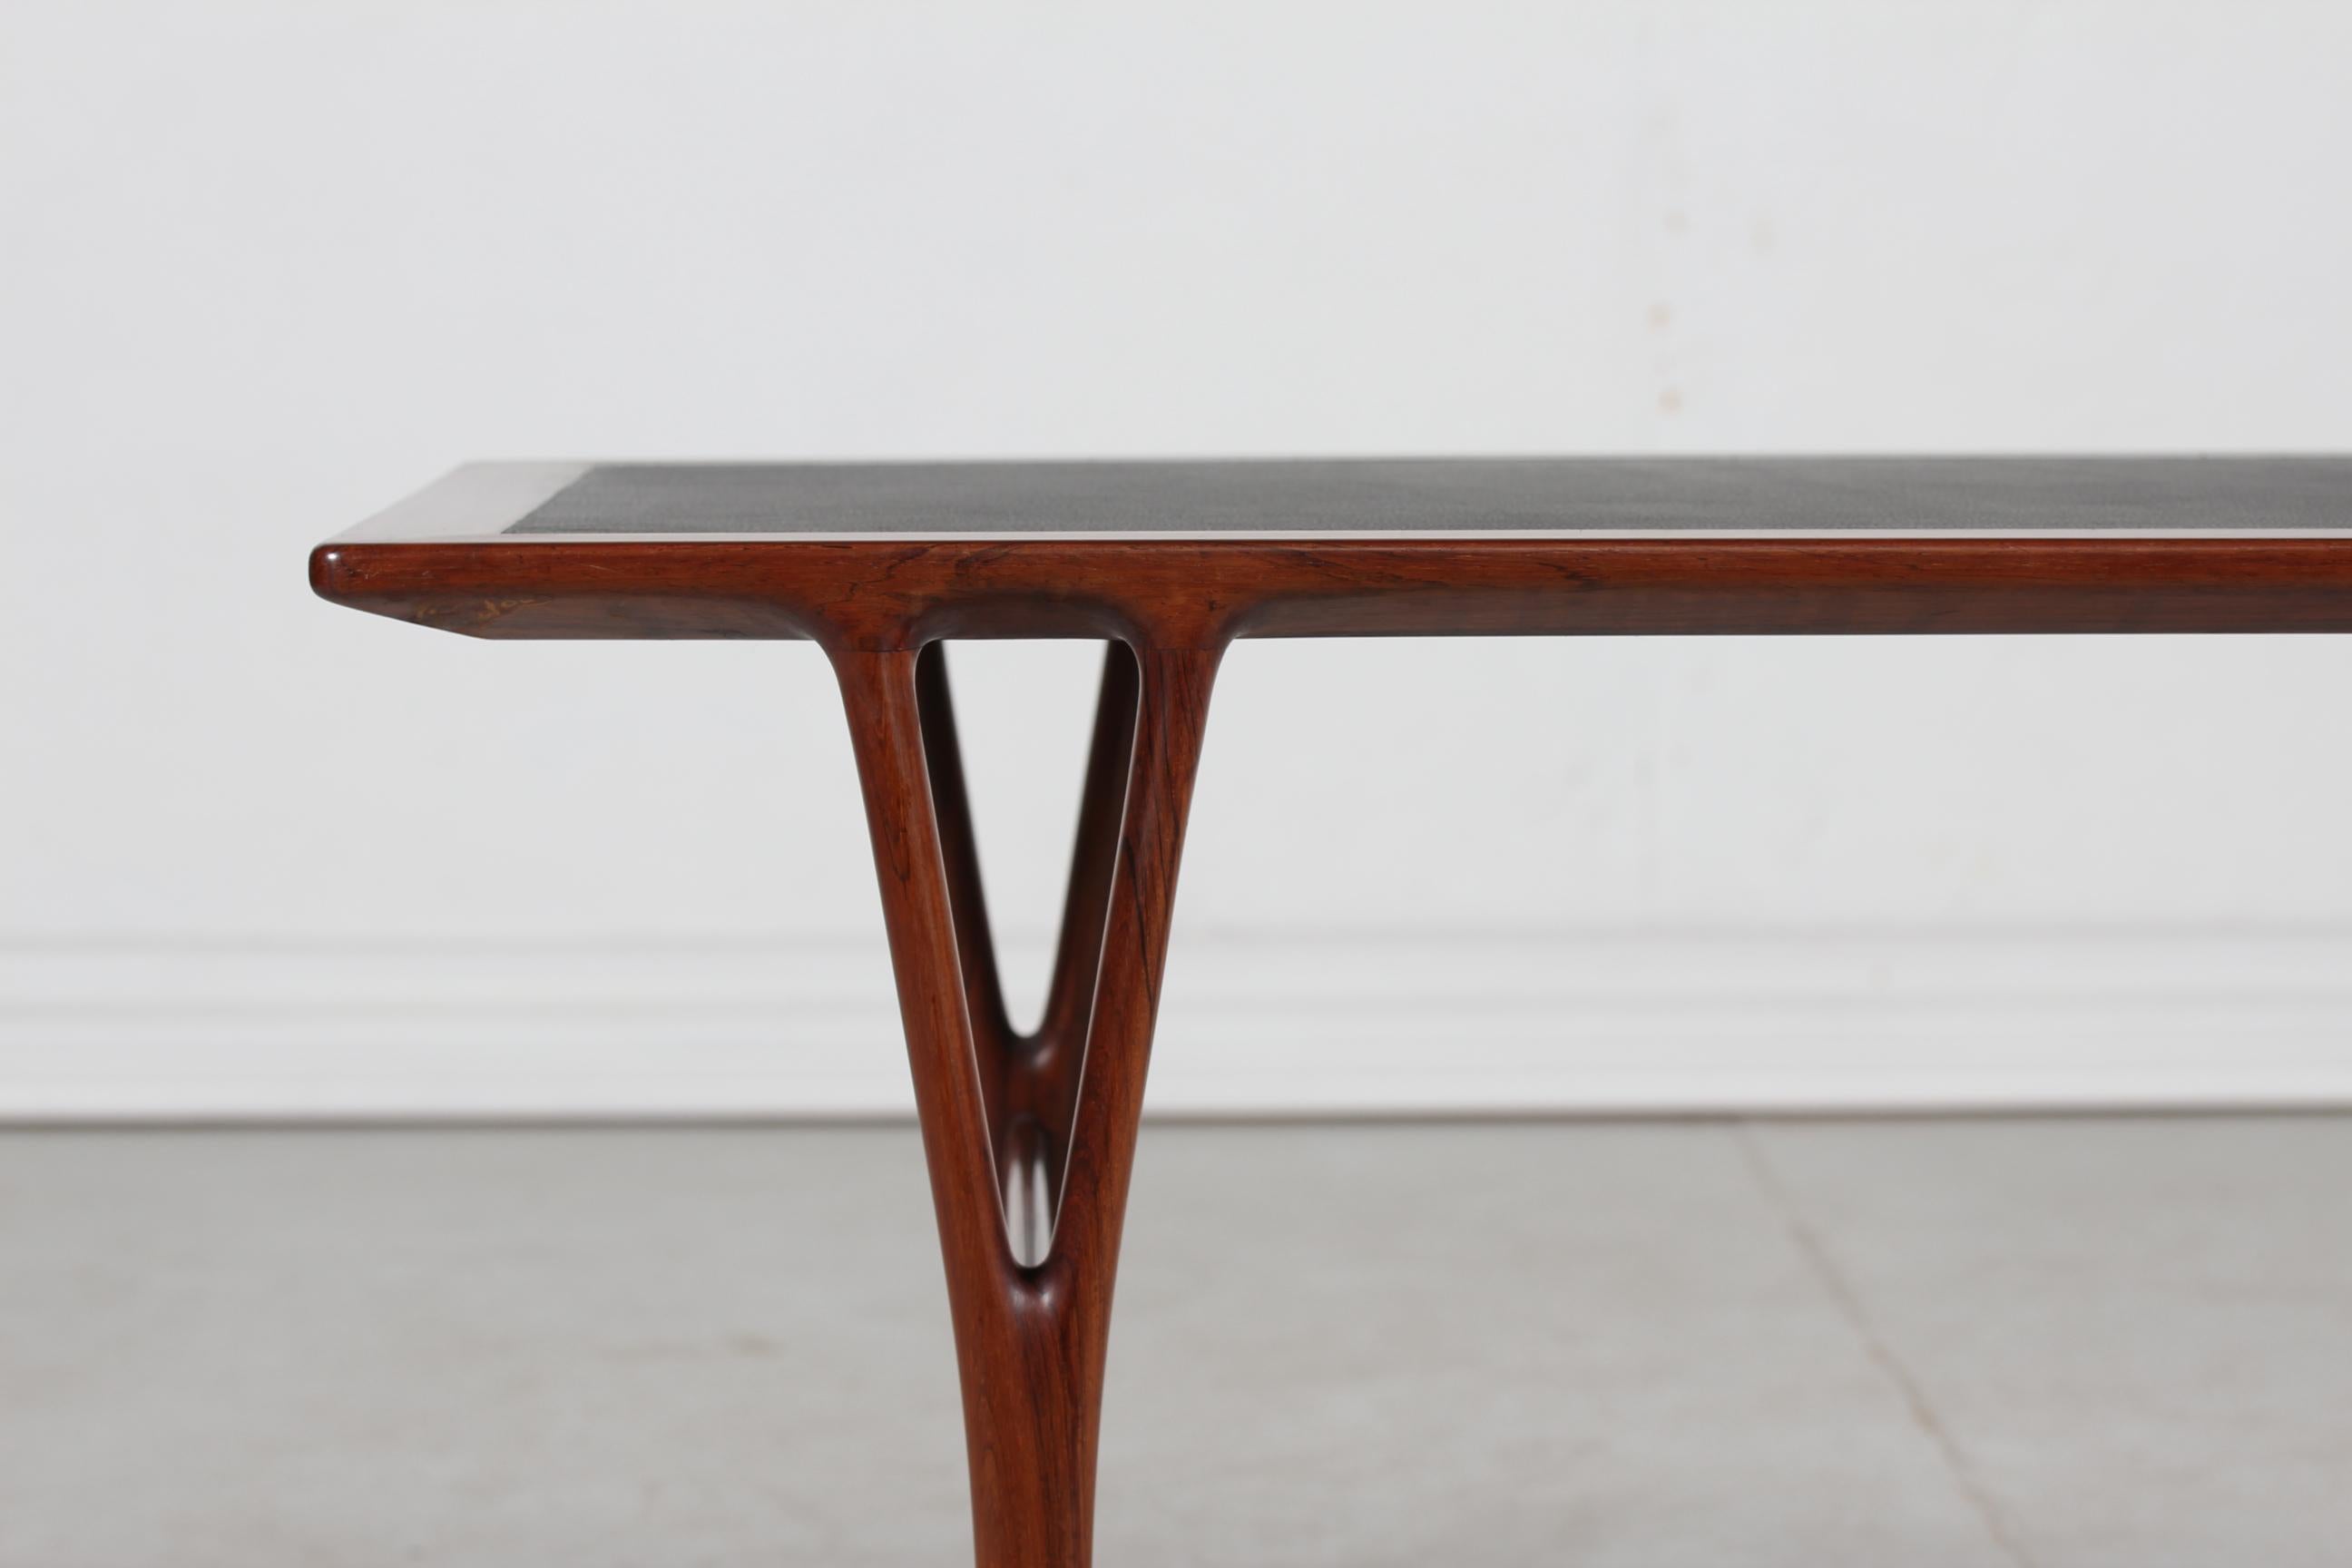 Helge Vestergaard Jensen (1917-1987) rectangular coffee table manufactured by master cabinetmaker Peder Pedersen, Copenhagen.
The table is made of rosewood with y-shaped legs and a black leather table top of newer date

Measures:
Length 120